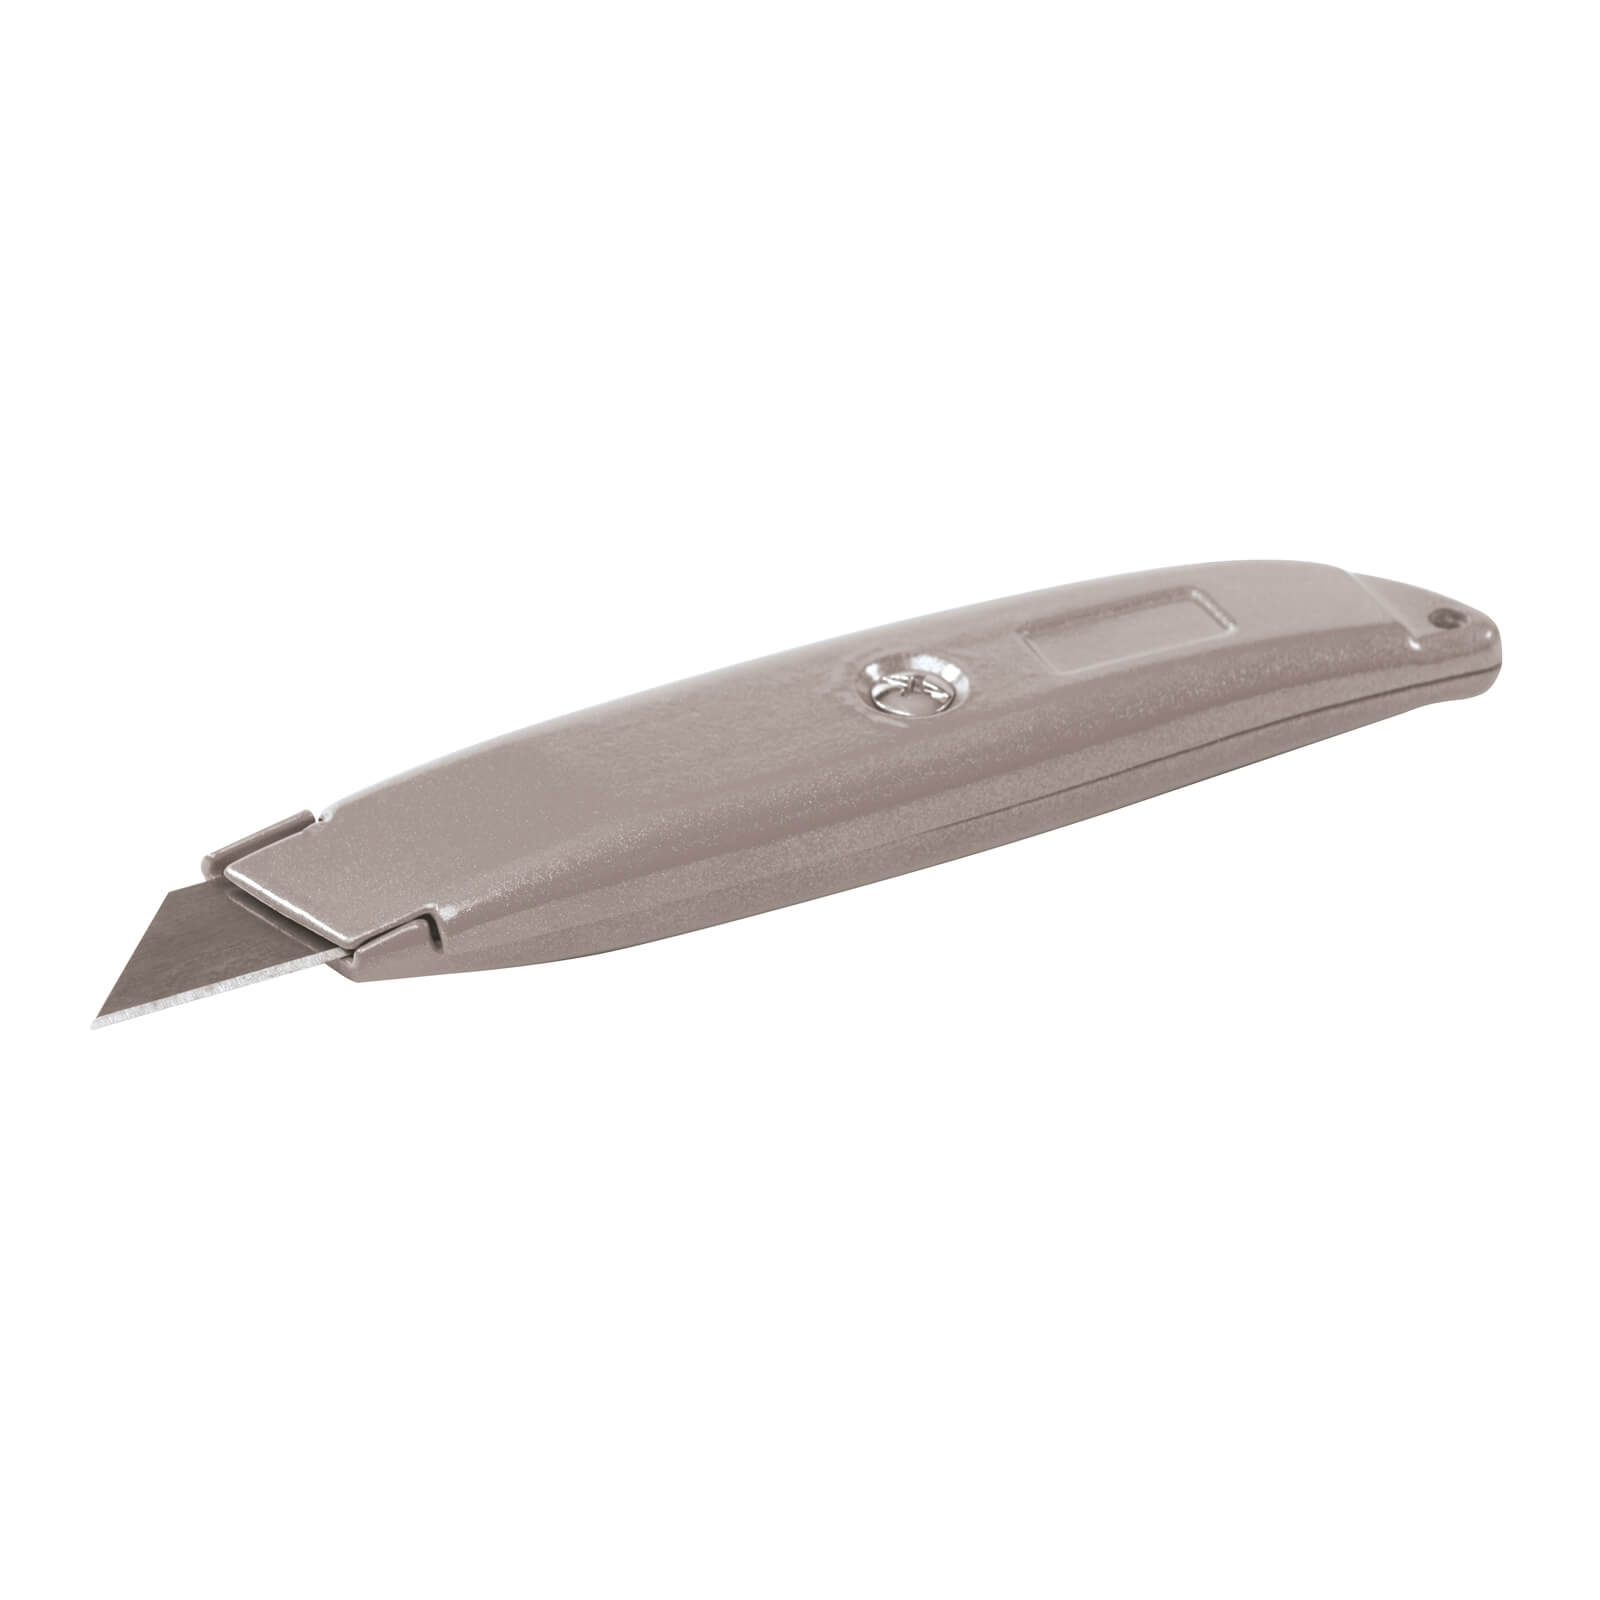 Photo of Silverline Retractable Knife Silver - 150mm